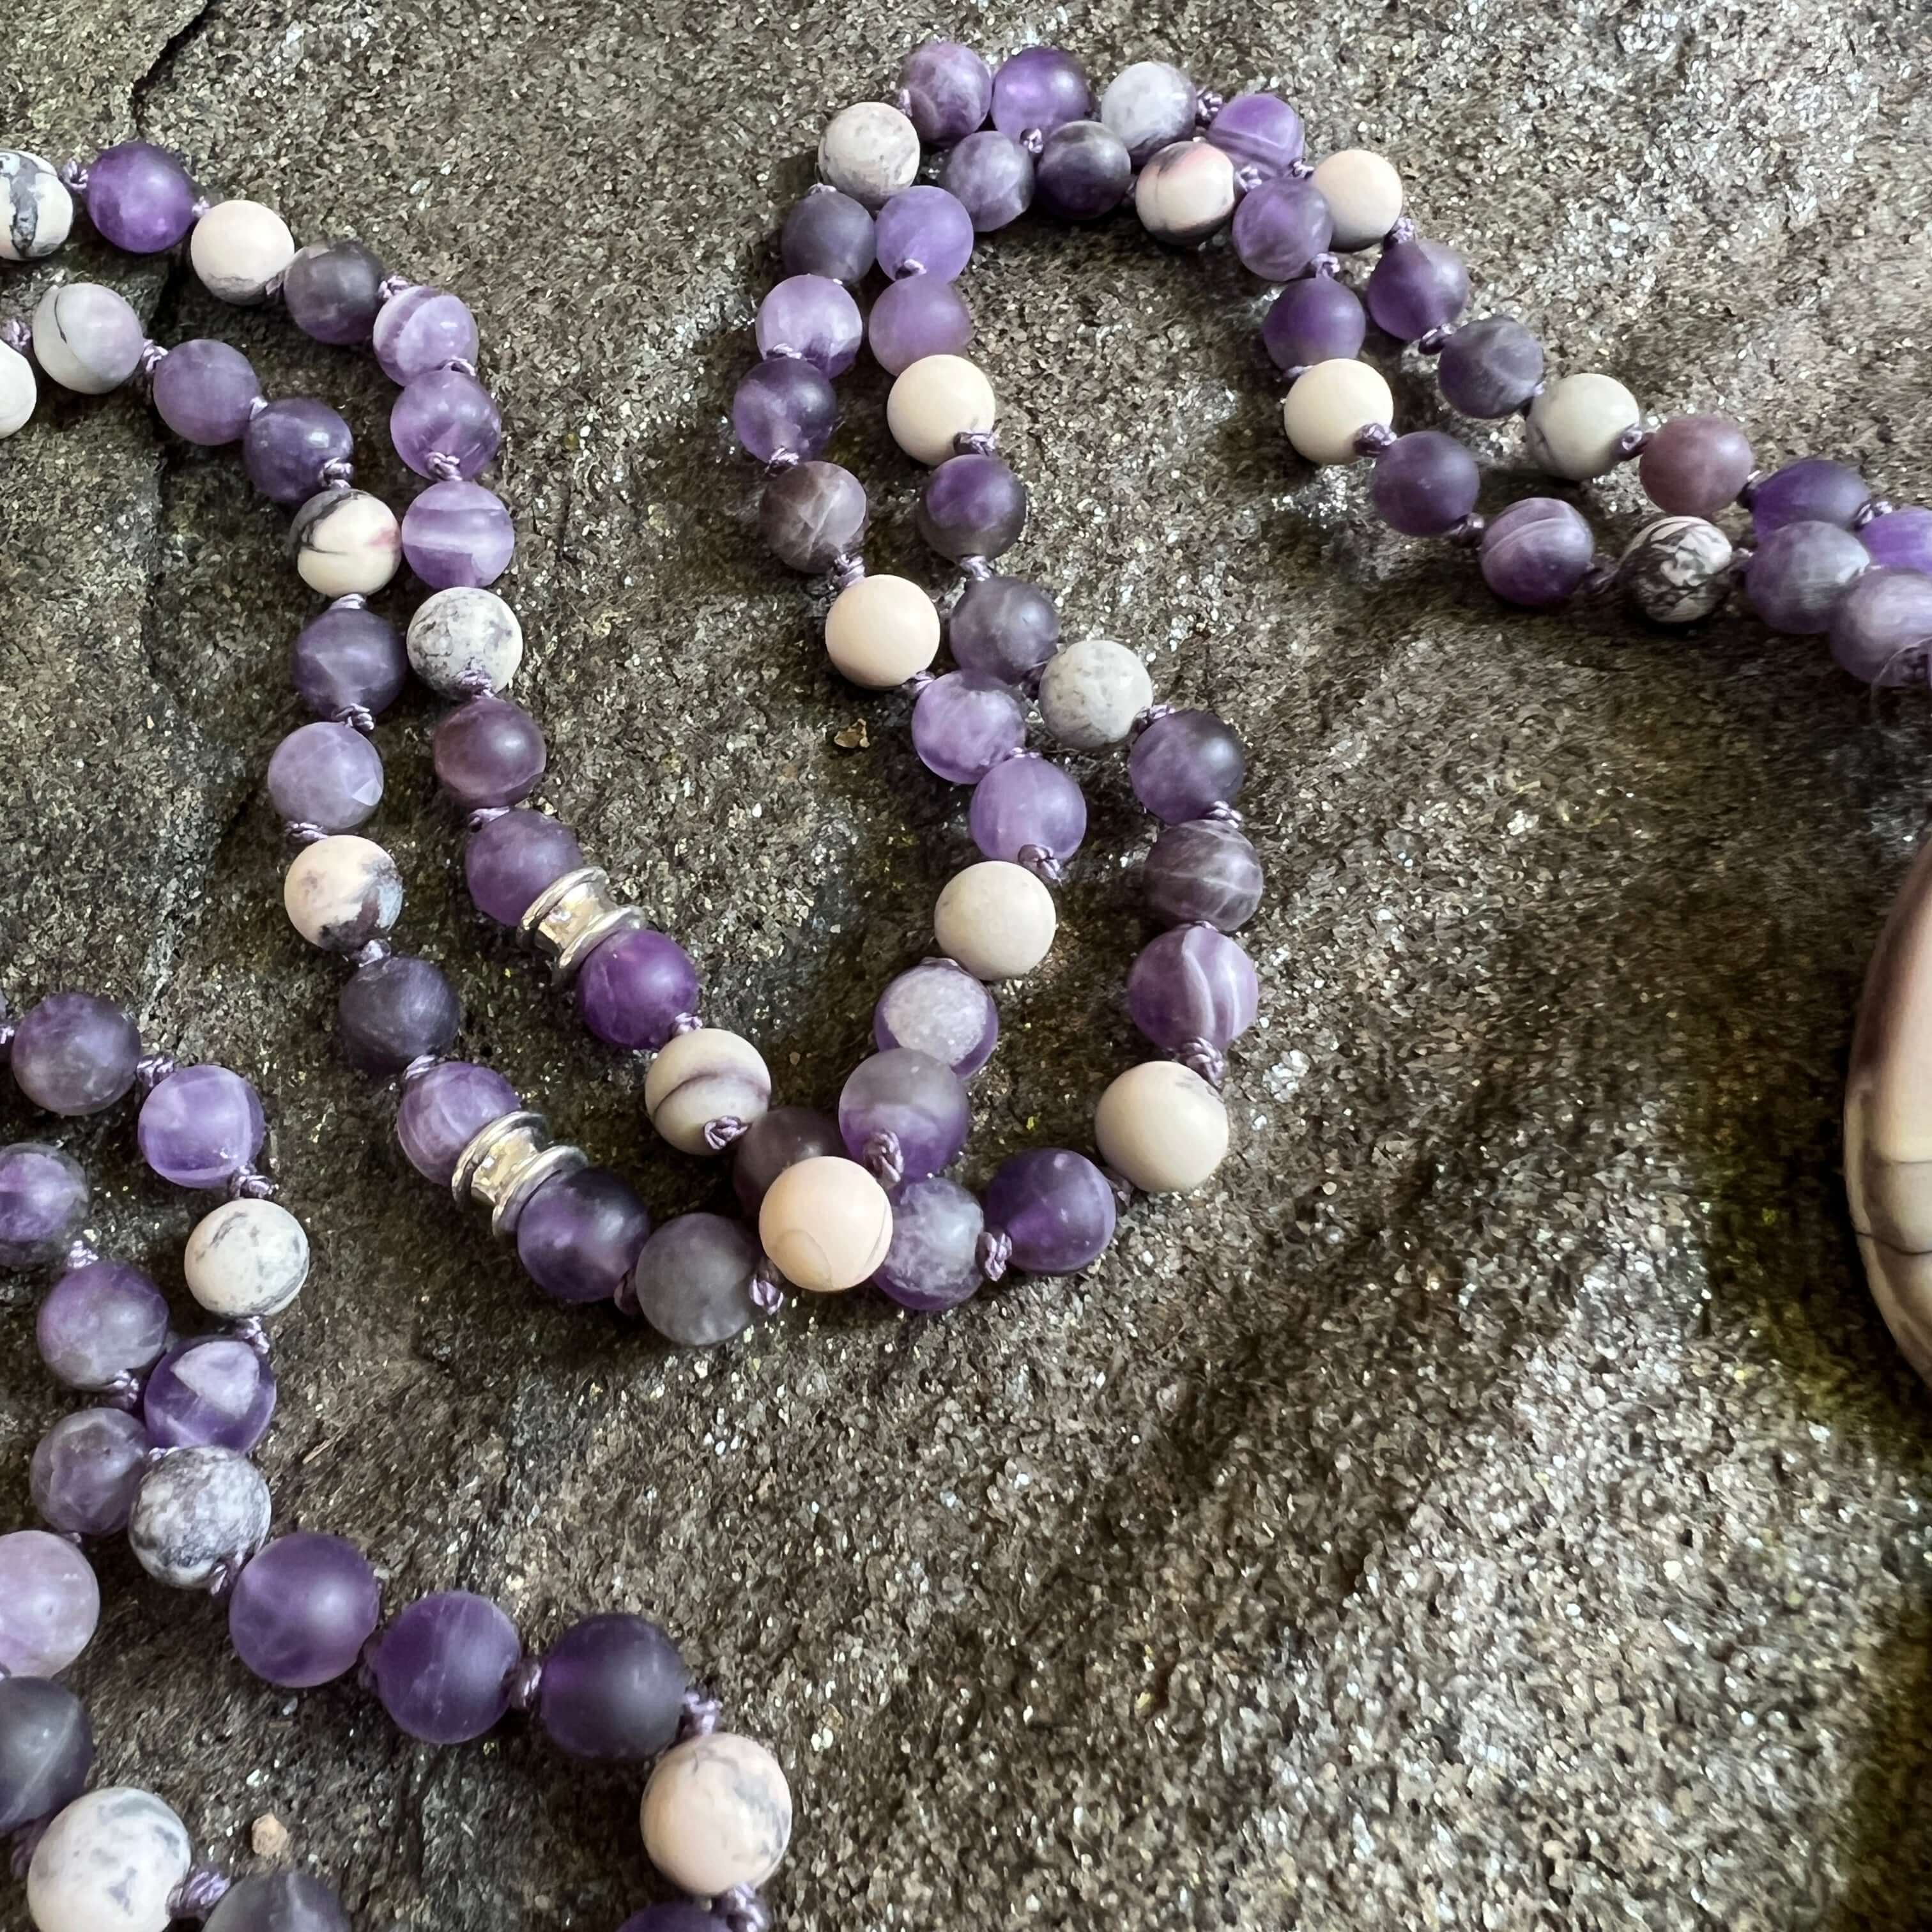 Third Eye Chakra Mala The Third Eye Chakra Mala is designed to help you tune into your inner voice and intuition. Handmade with multiple forms of matte Amethyst and Porcelain Jasper stones, the Third Eye Chakra Mala provides the wearer with energy that al